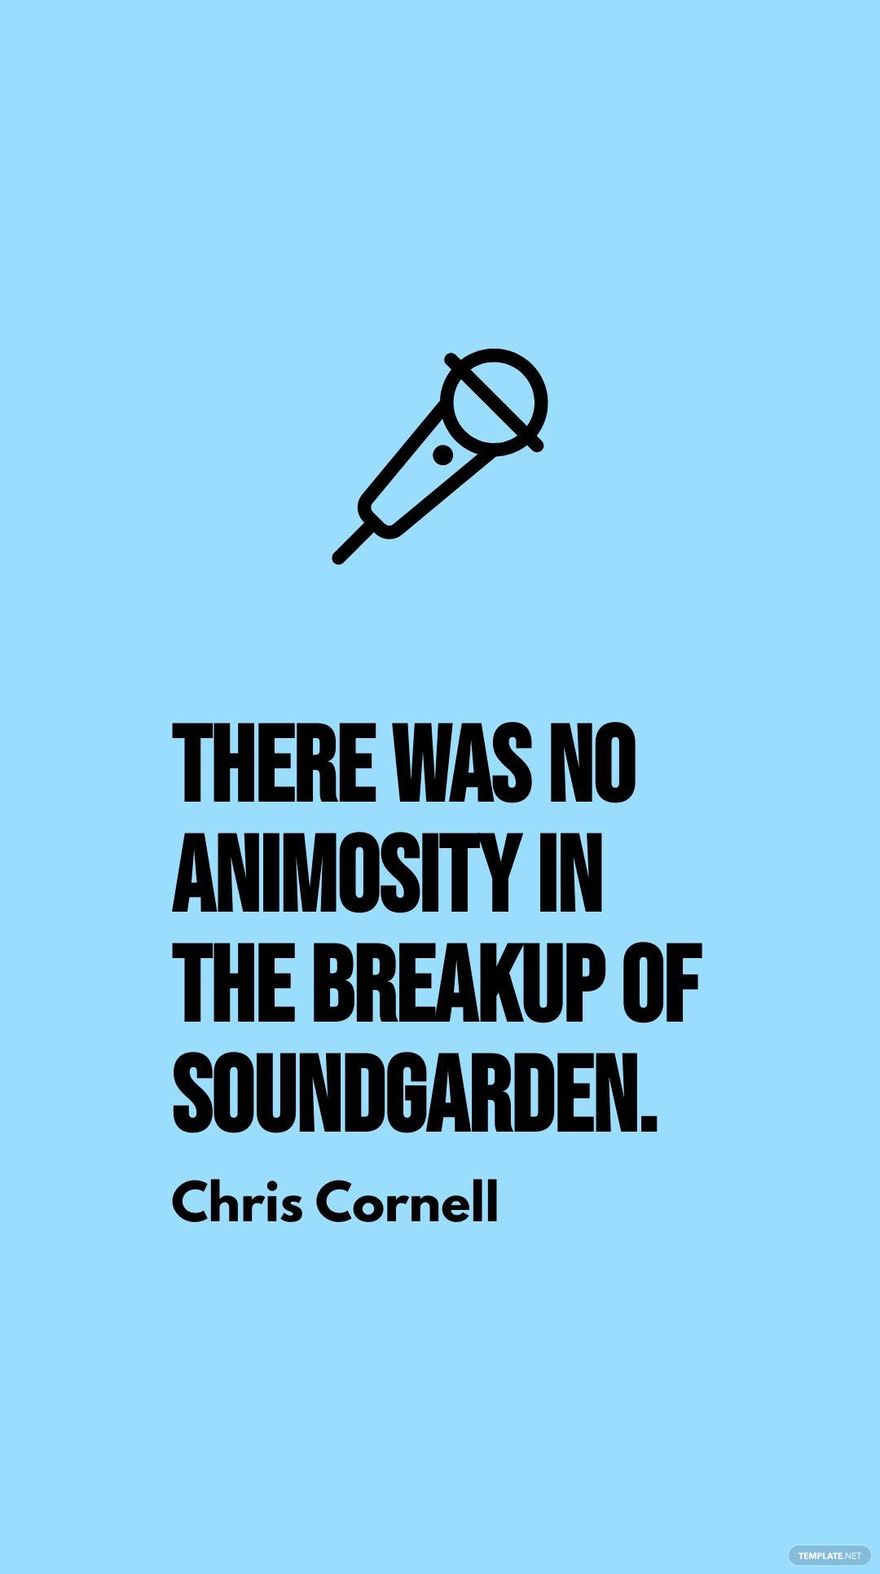 Chris Cornell - There was no animosity in the breakup of Soundgarden.